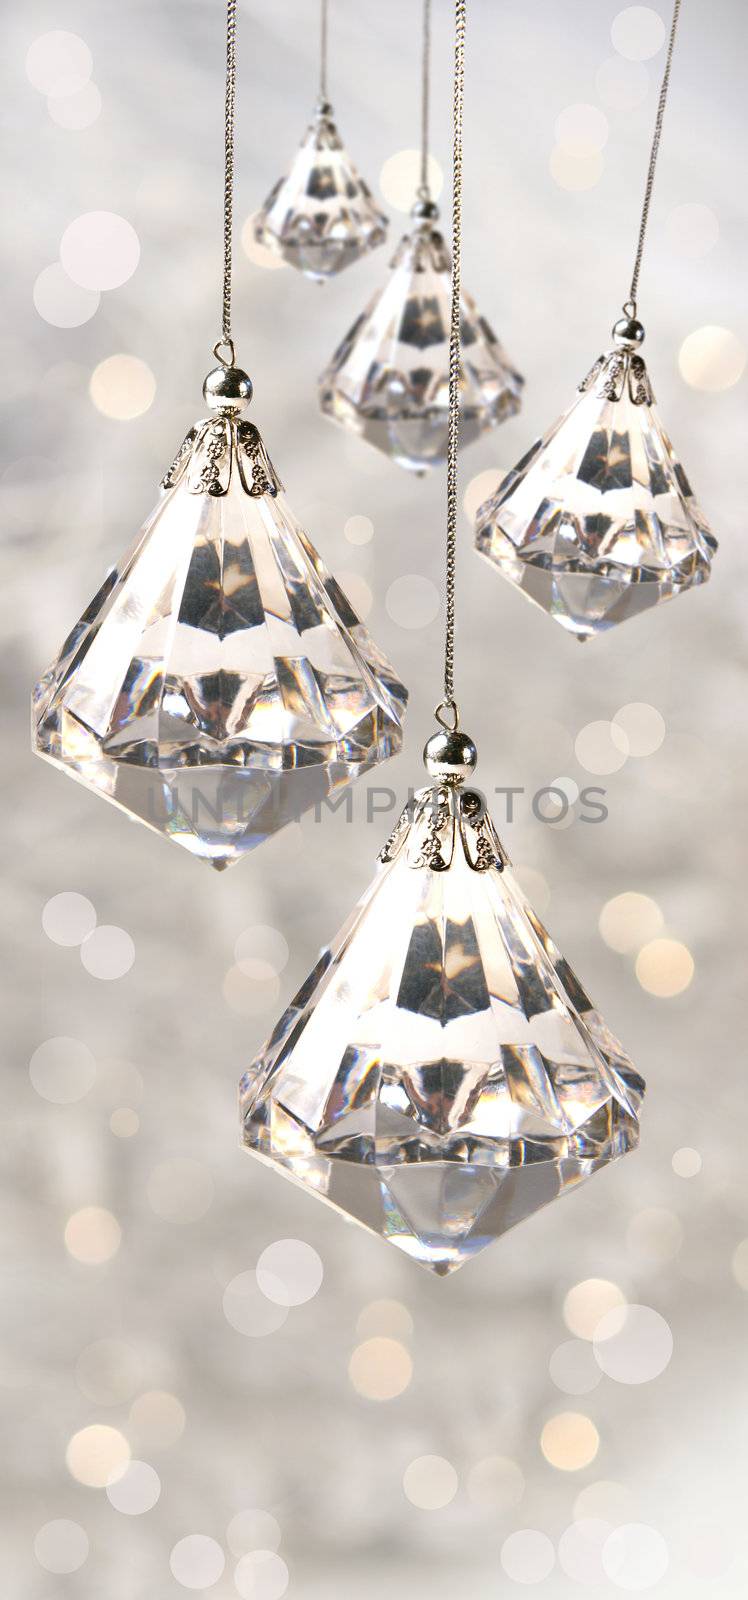 Crystal christmas ornaments against festive silver background